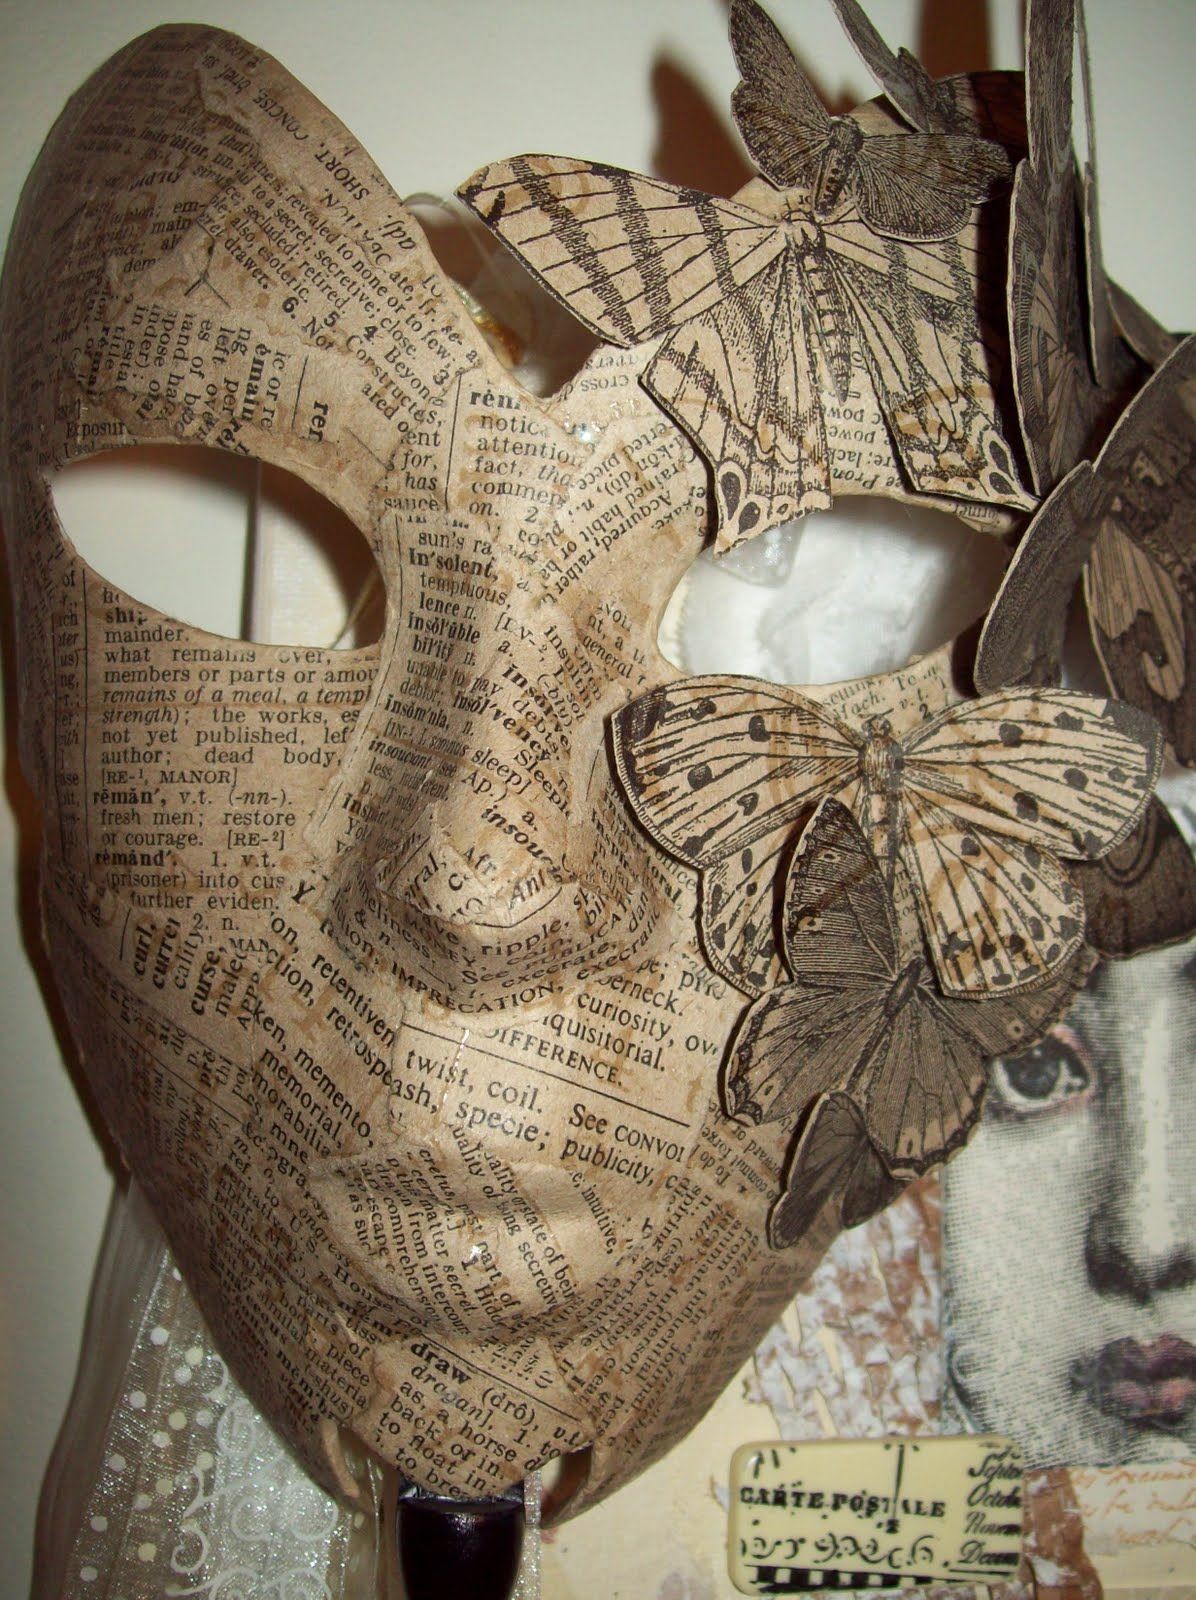 Hollow Mask Papercraft if I Had the Time and Artistic Skills I Would Make This for the